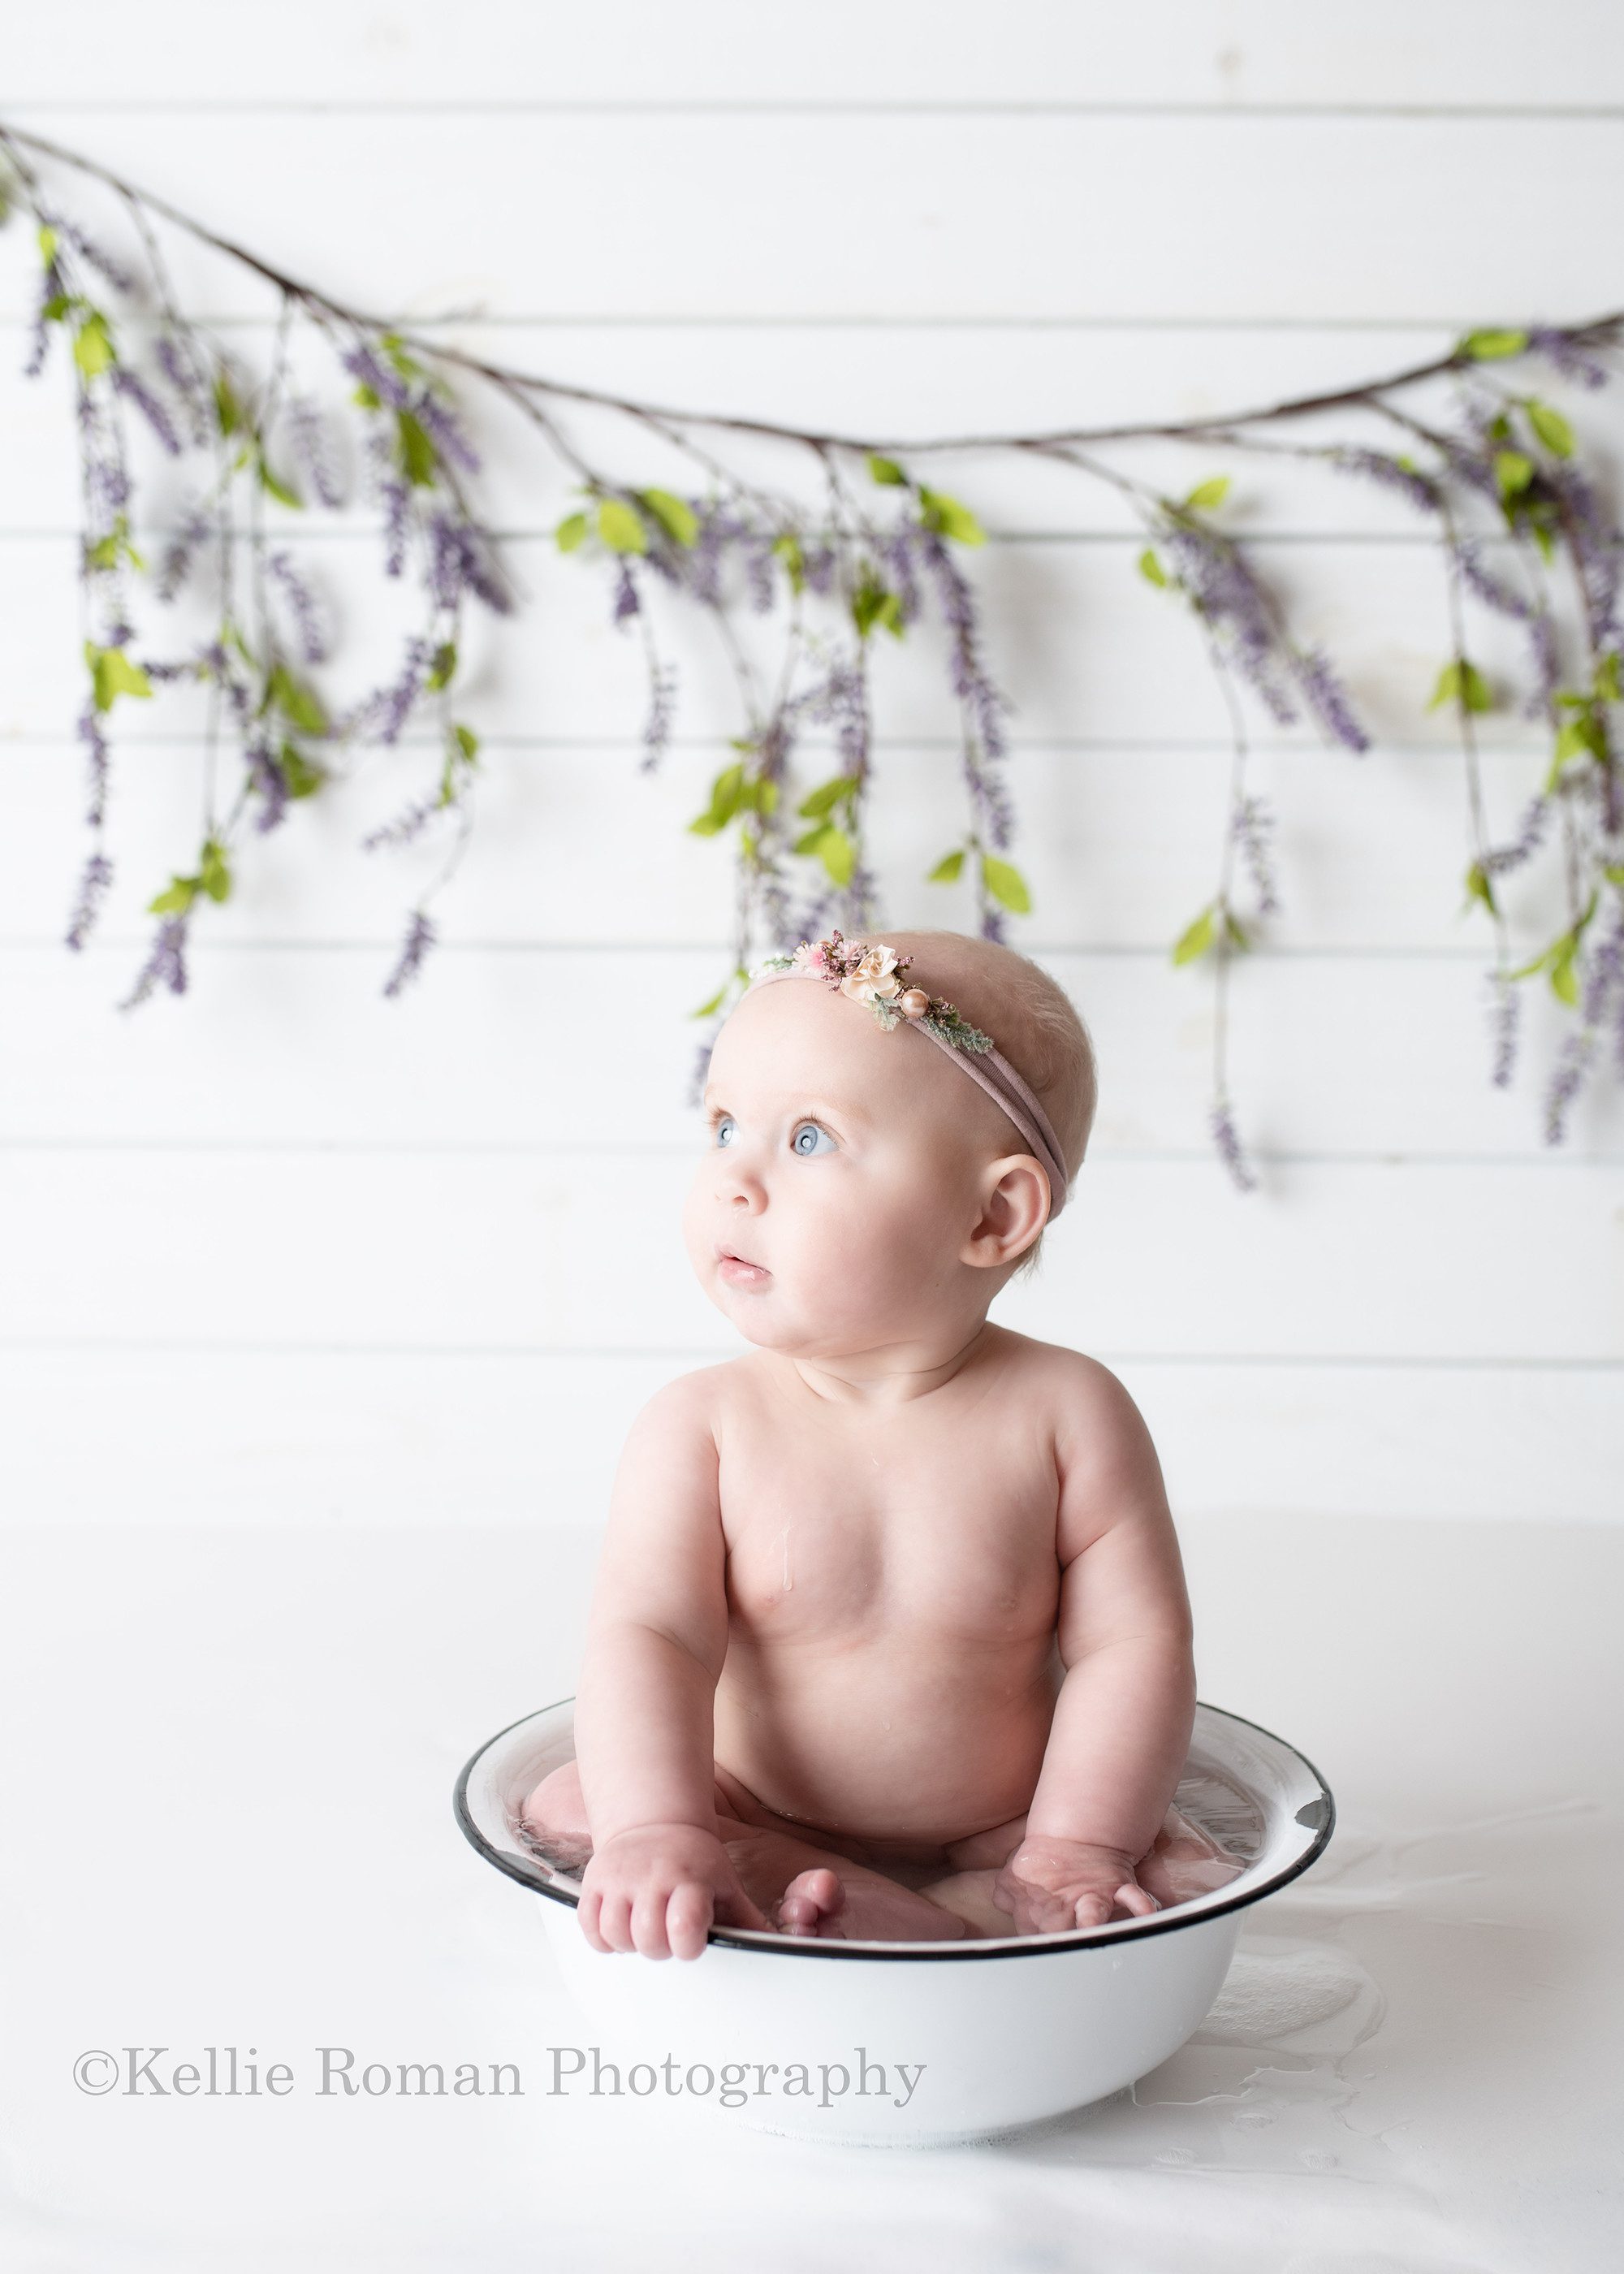 happiest six month old. a six month old baby girl is in a milwaukee Wisconsin photo studio. She's sitting in a white vintage bowl with lots of water in it. The water is all over the white floor. The baby is looking off to the side with a serious look. She has on a headband and is sitting in front of a white wood wall with a lilac vine.